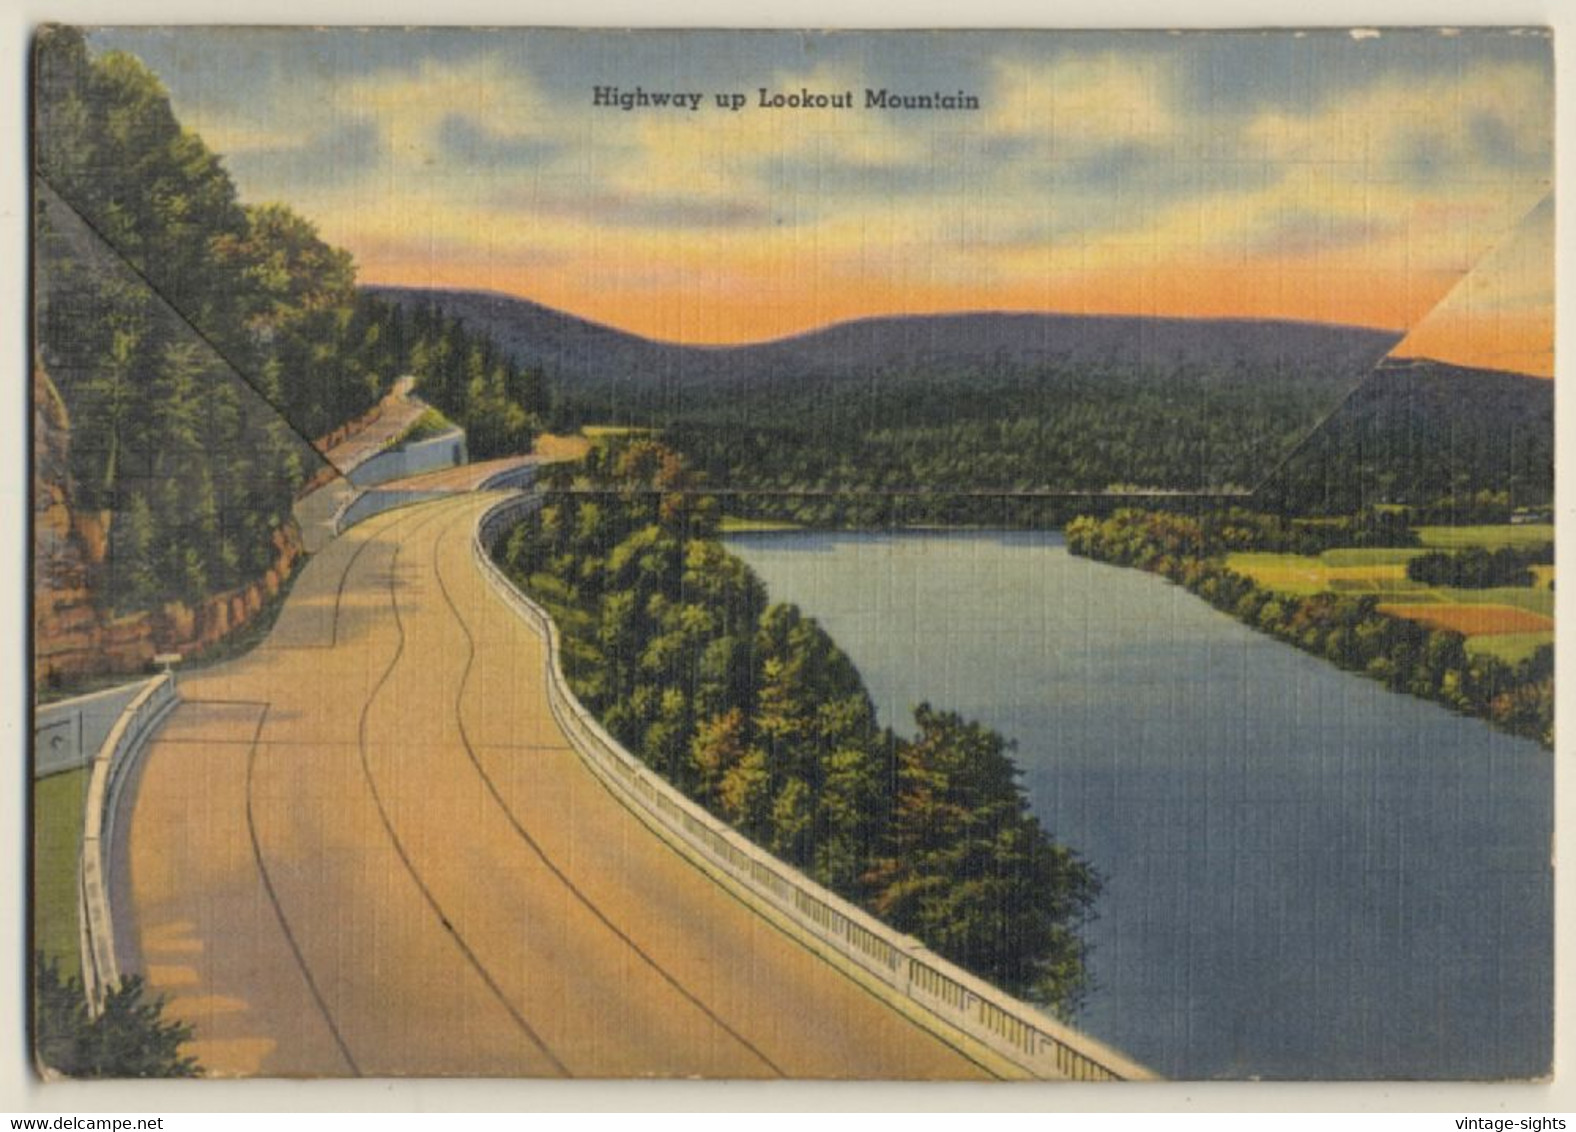 Chattanooga Tenessee : Views Of Lookout Mountain (Vintage Leporello PC ~1940s) - Chattanooga